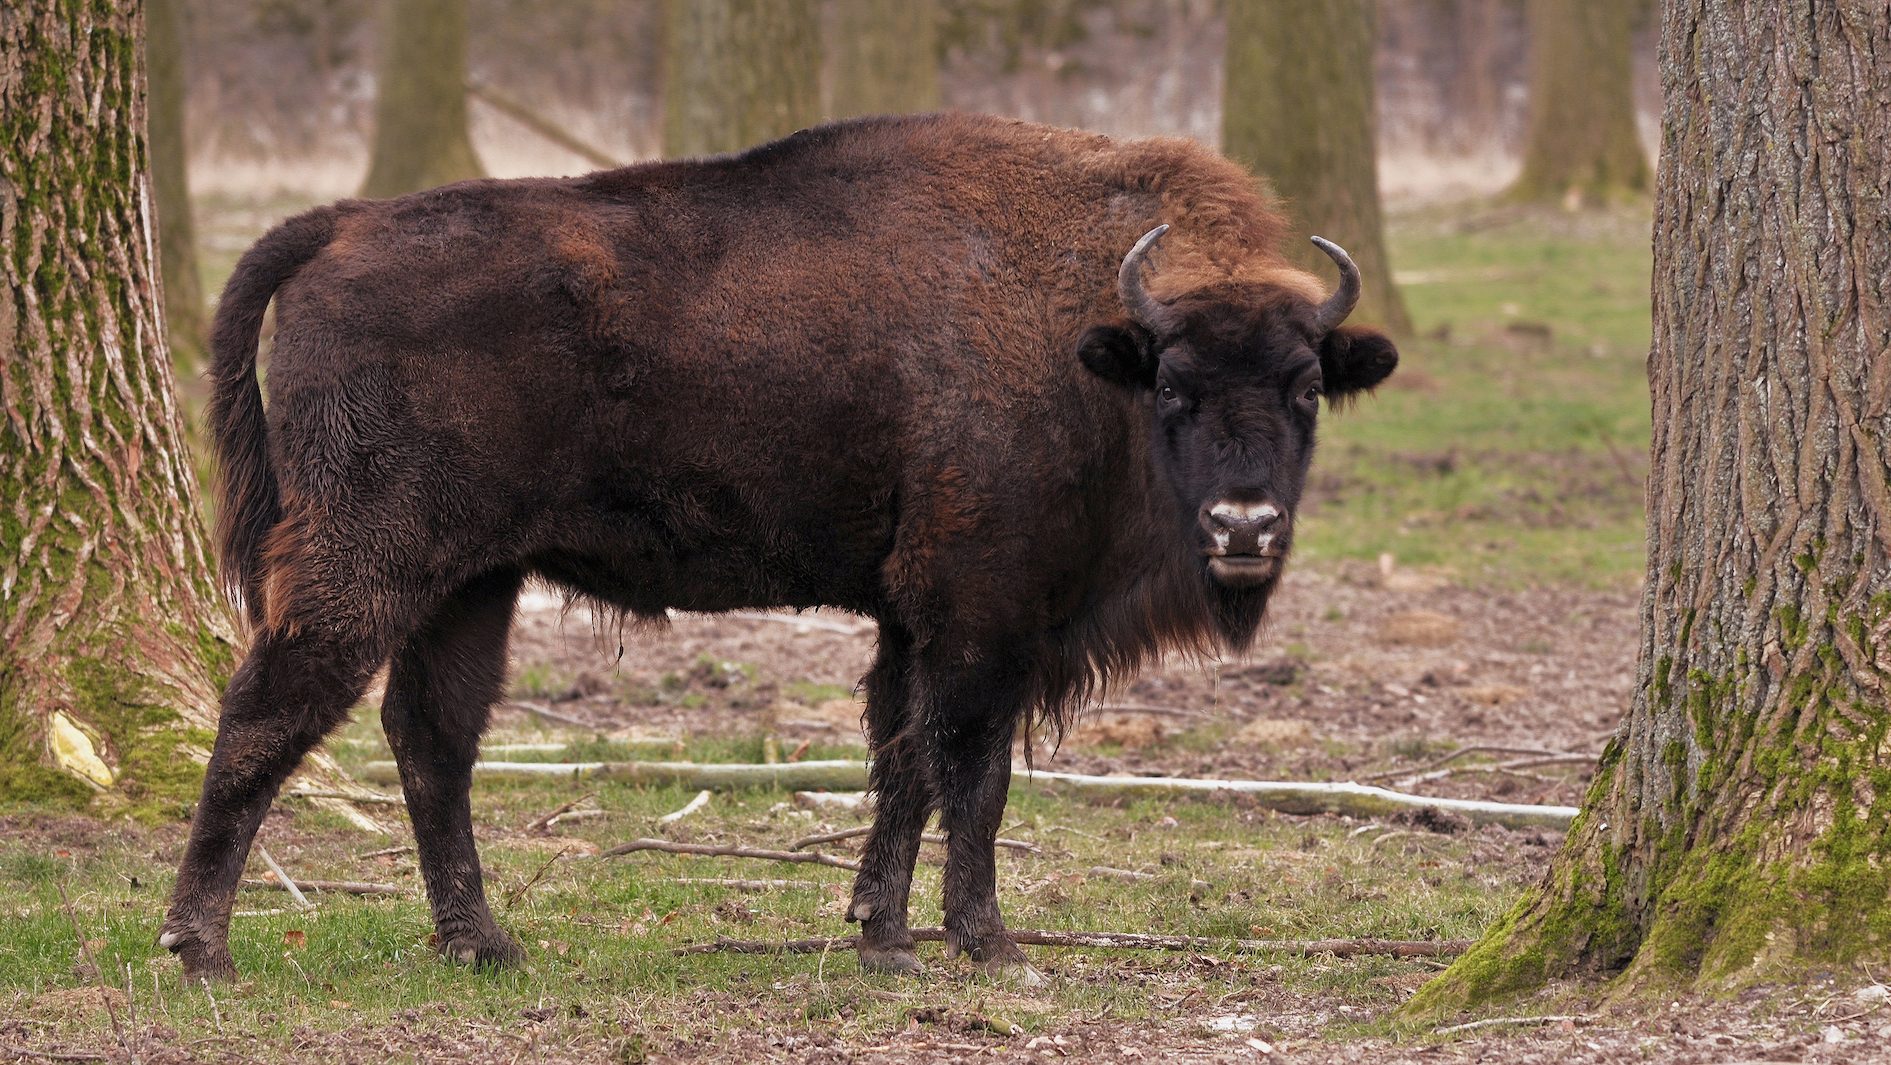 large European bison standing in a forest looking at the camera